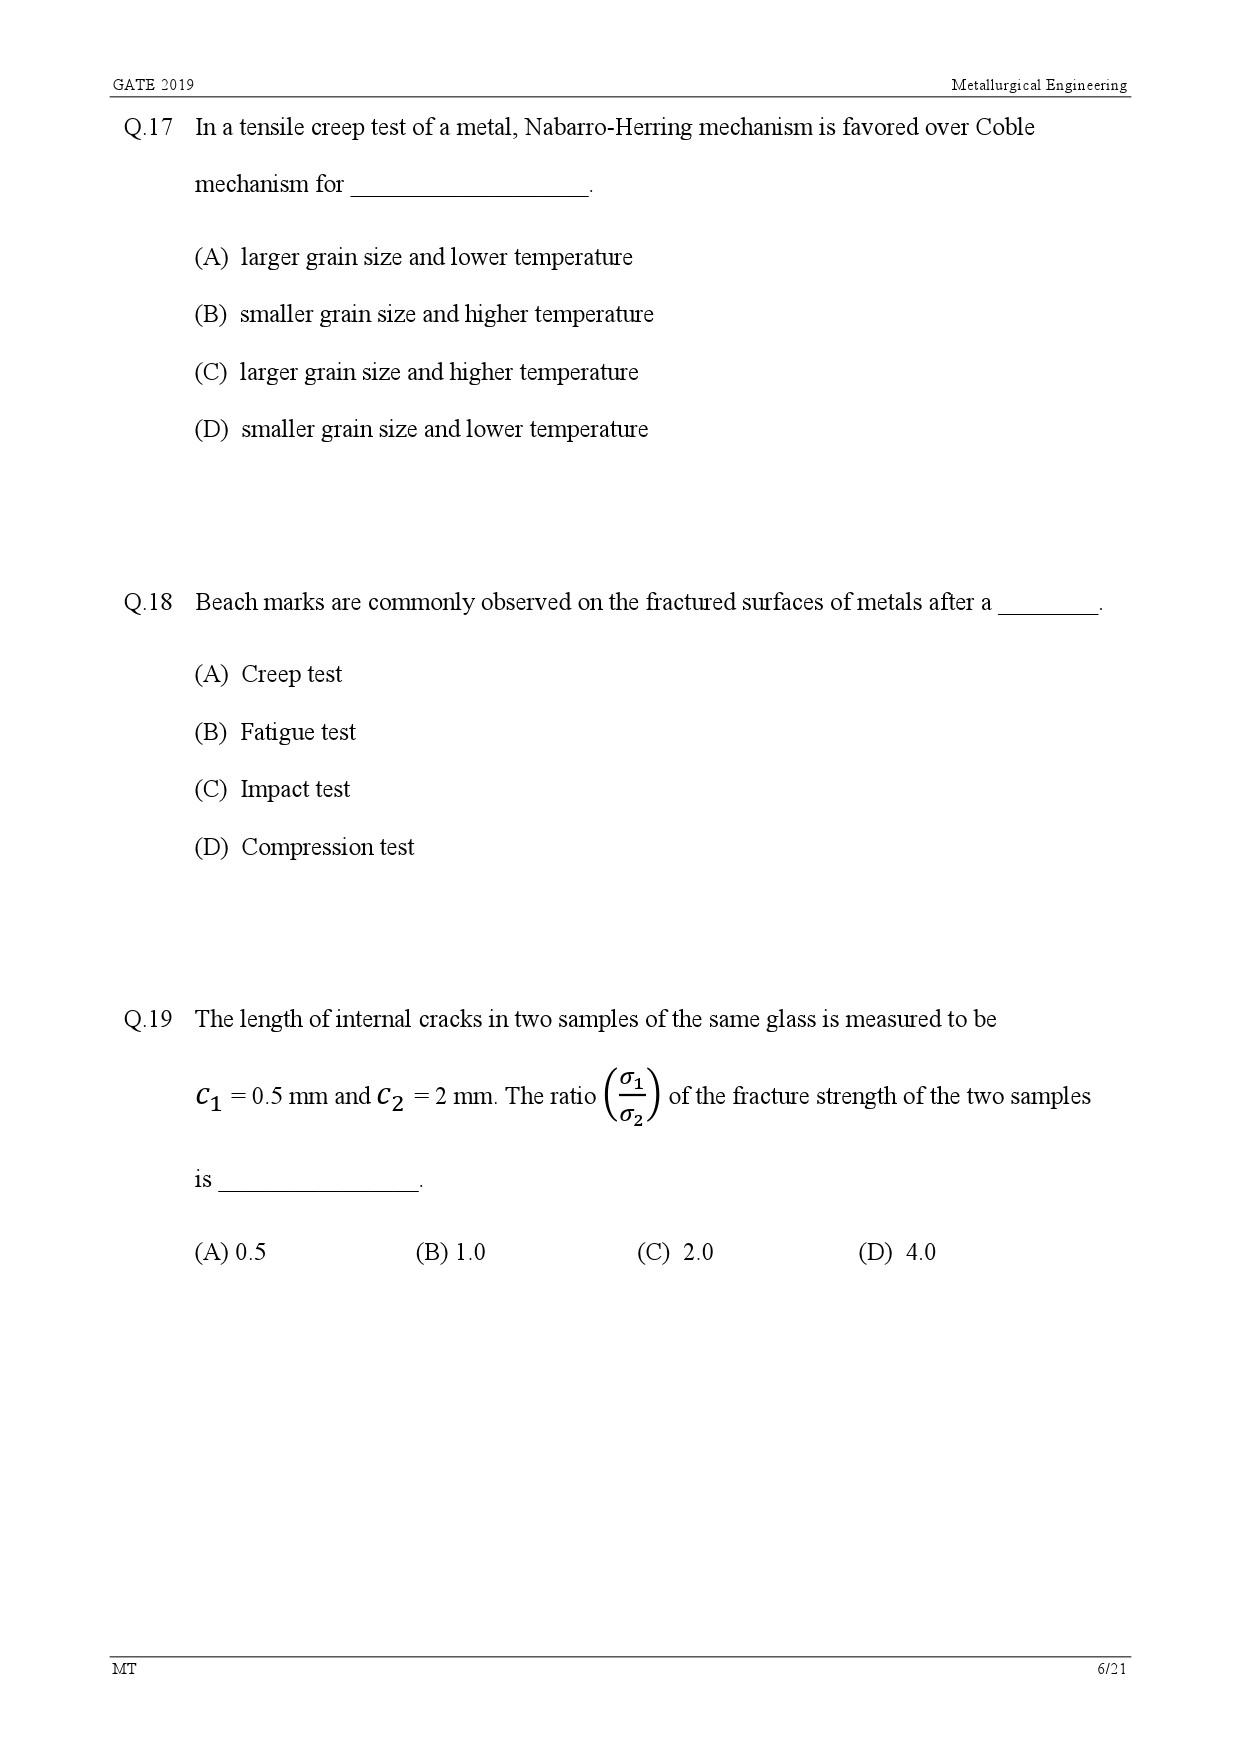 GATE Exam Question Paper 2019 Metallurgical Engineering 9